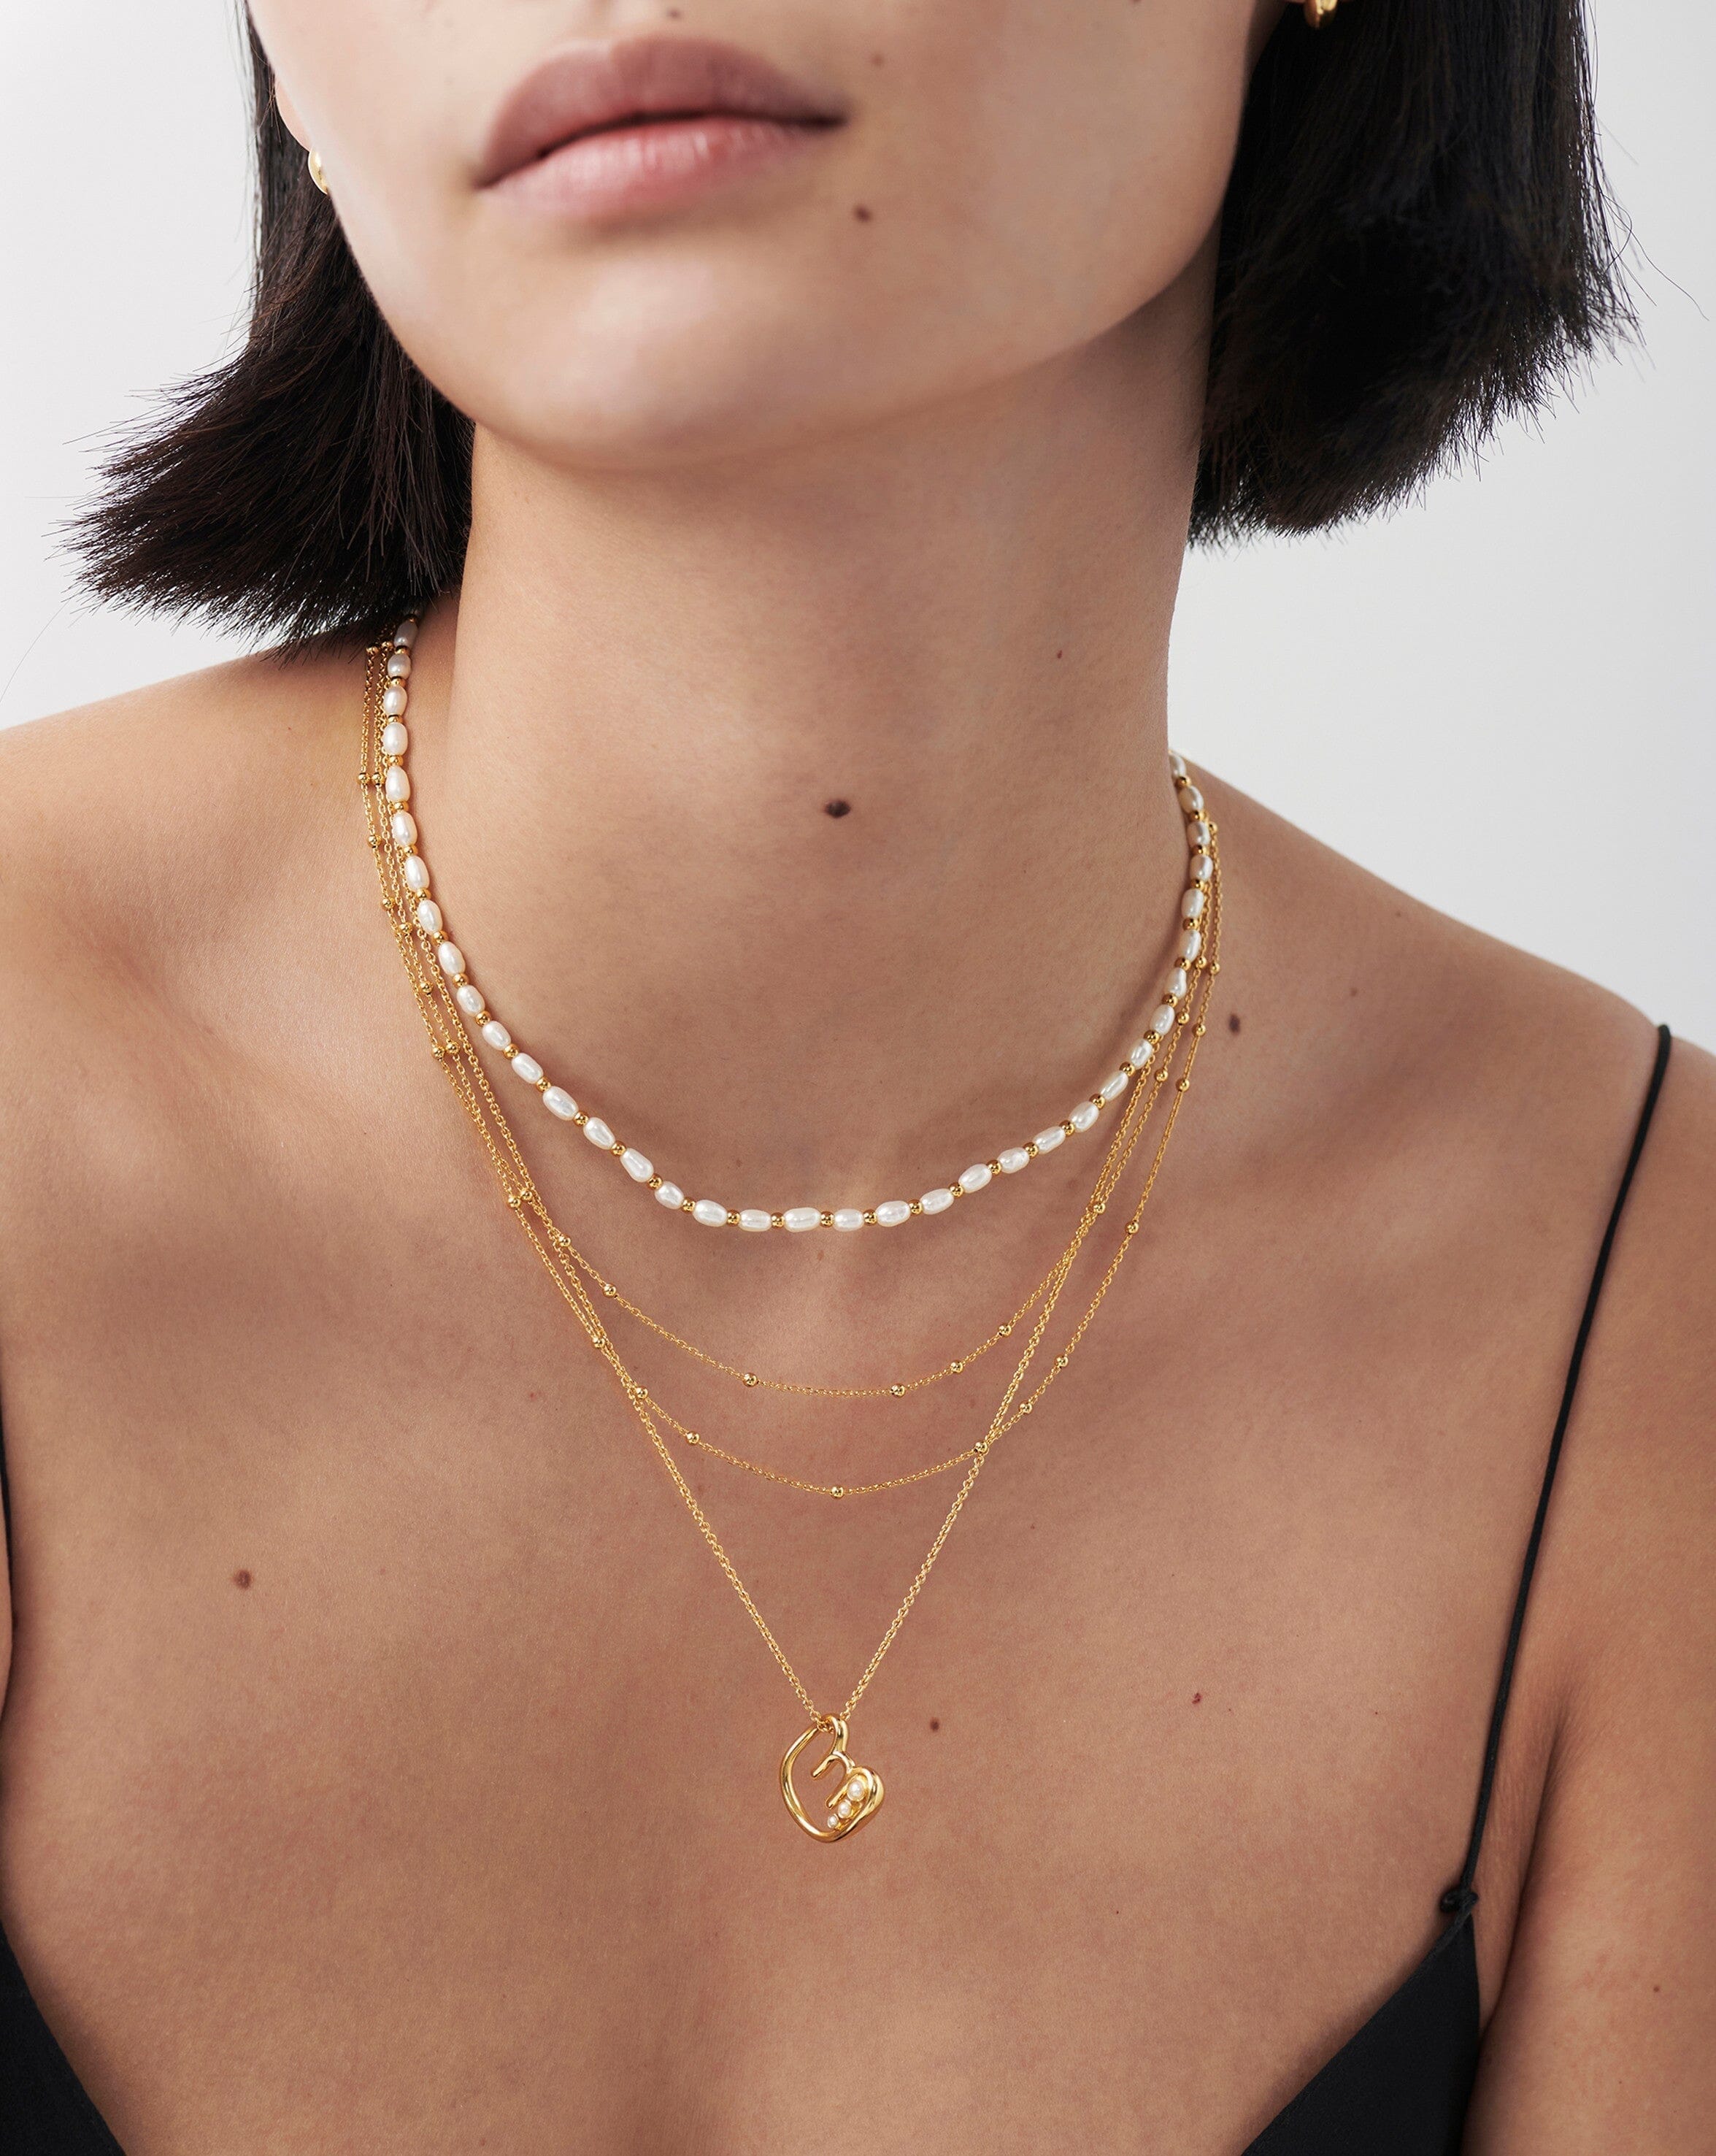 Initial Pearl Choker: 14k Gold-Filled | Complete. Studio